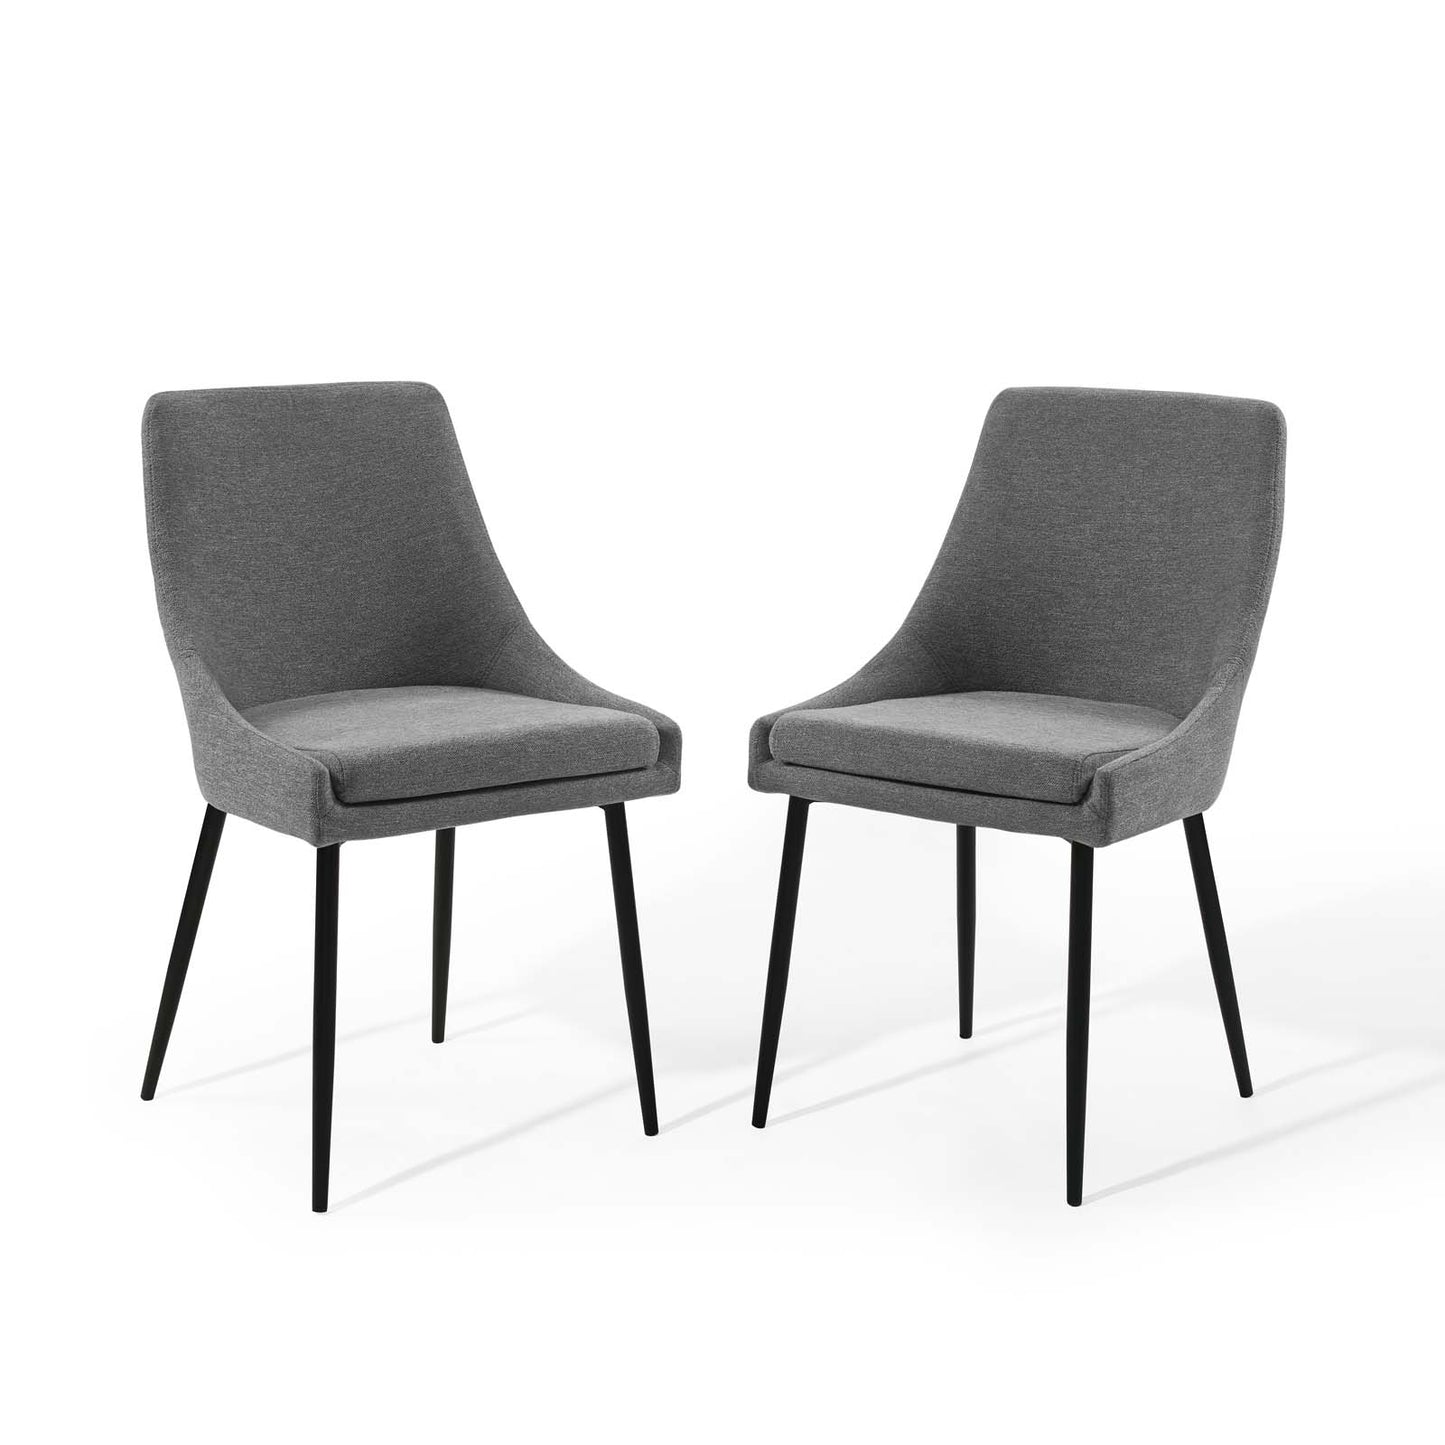 Viscount Upholstered Fabric Dining Chairs - Set of 2 Black Charcoal EEI-3809-BLK-CHA